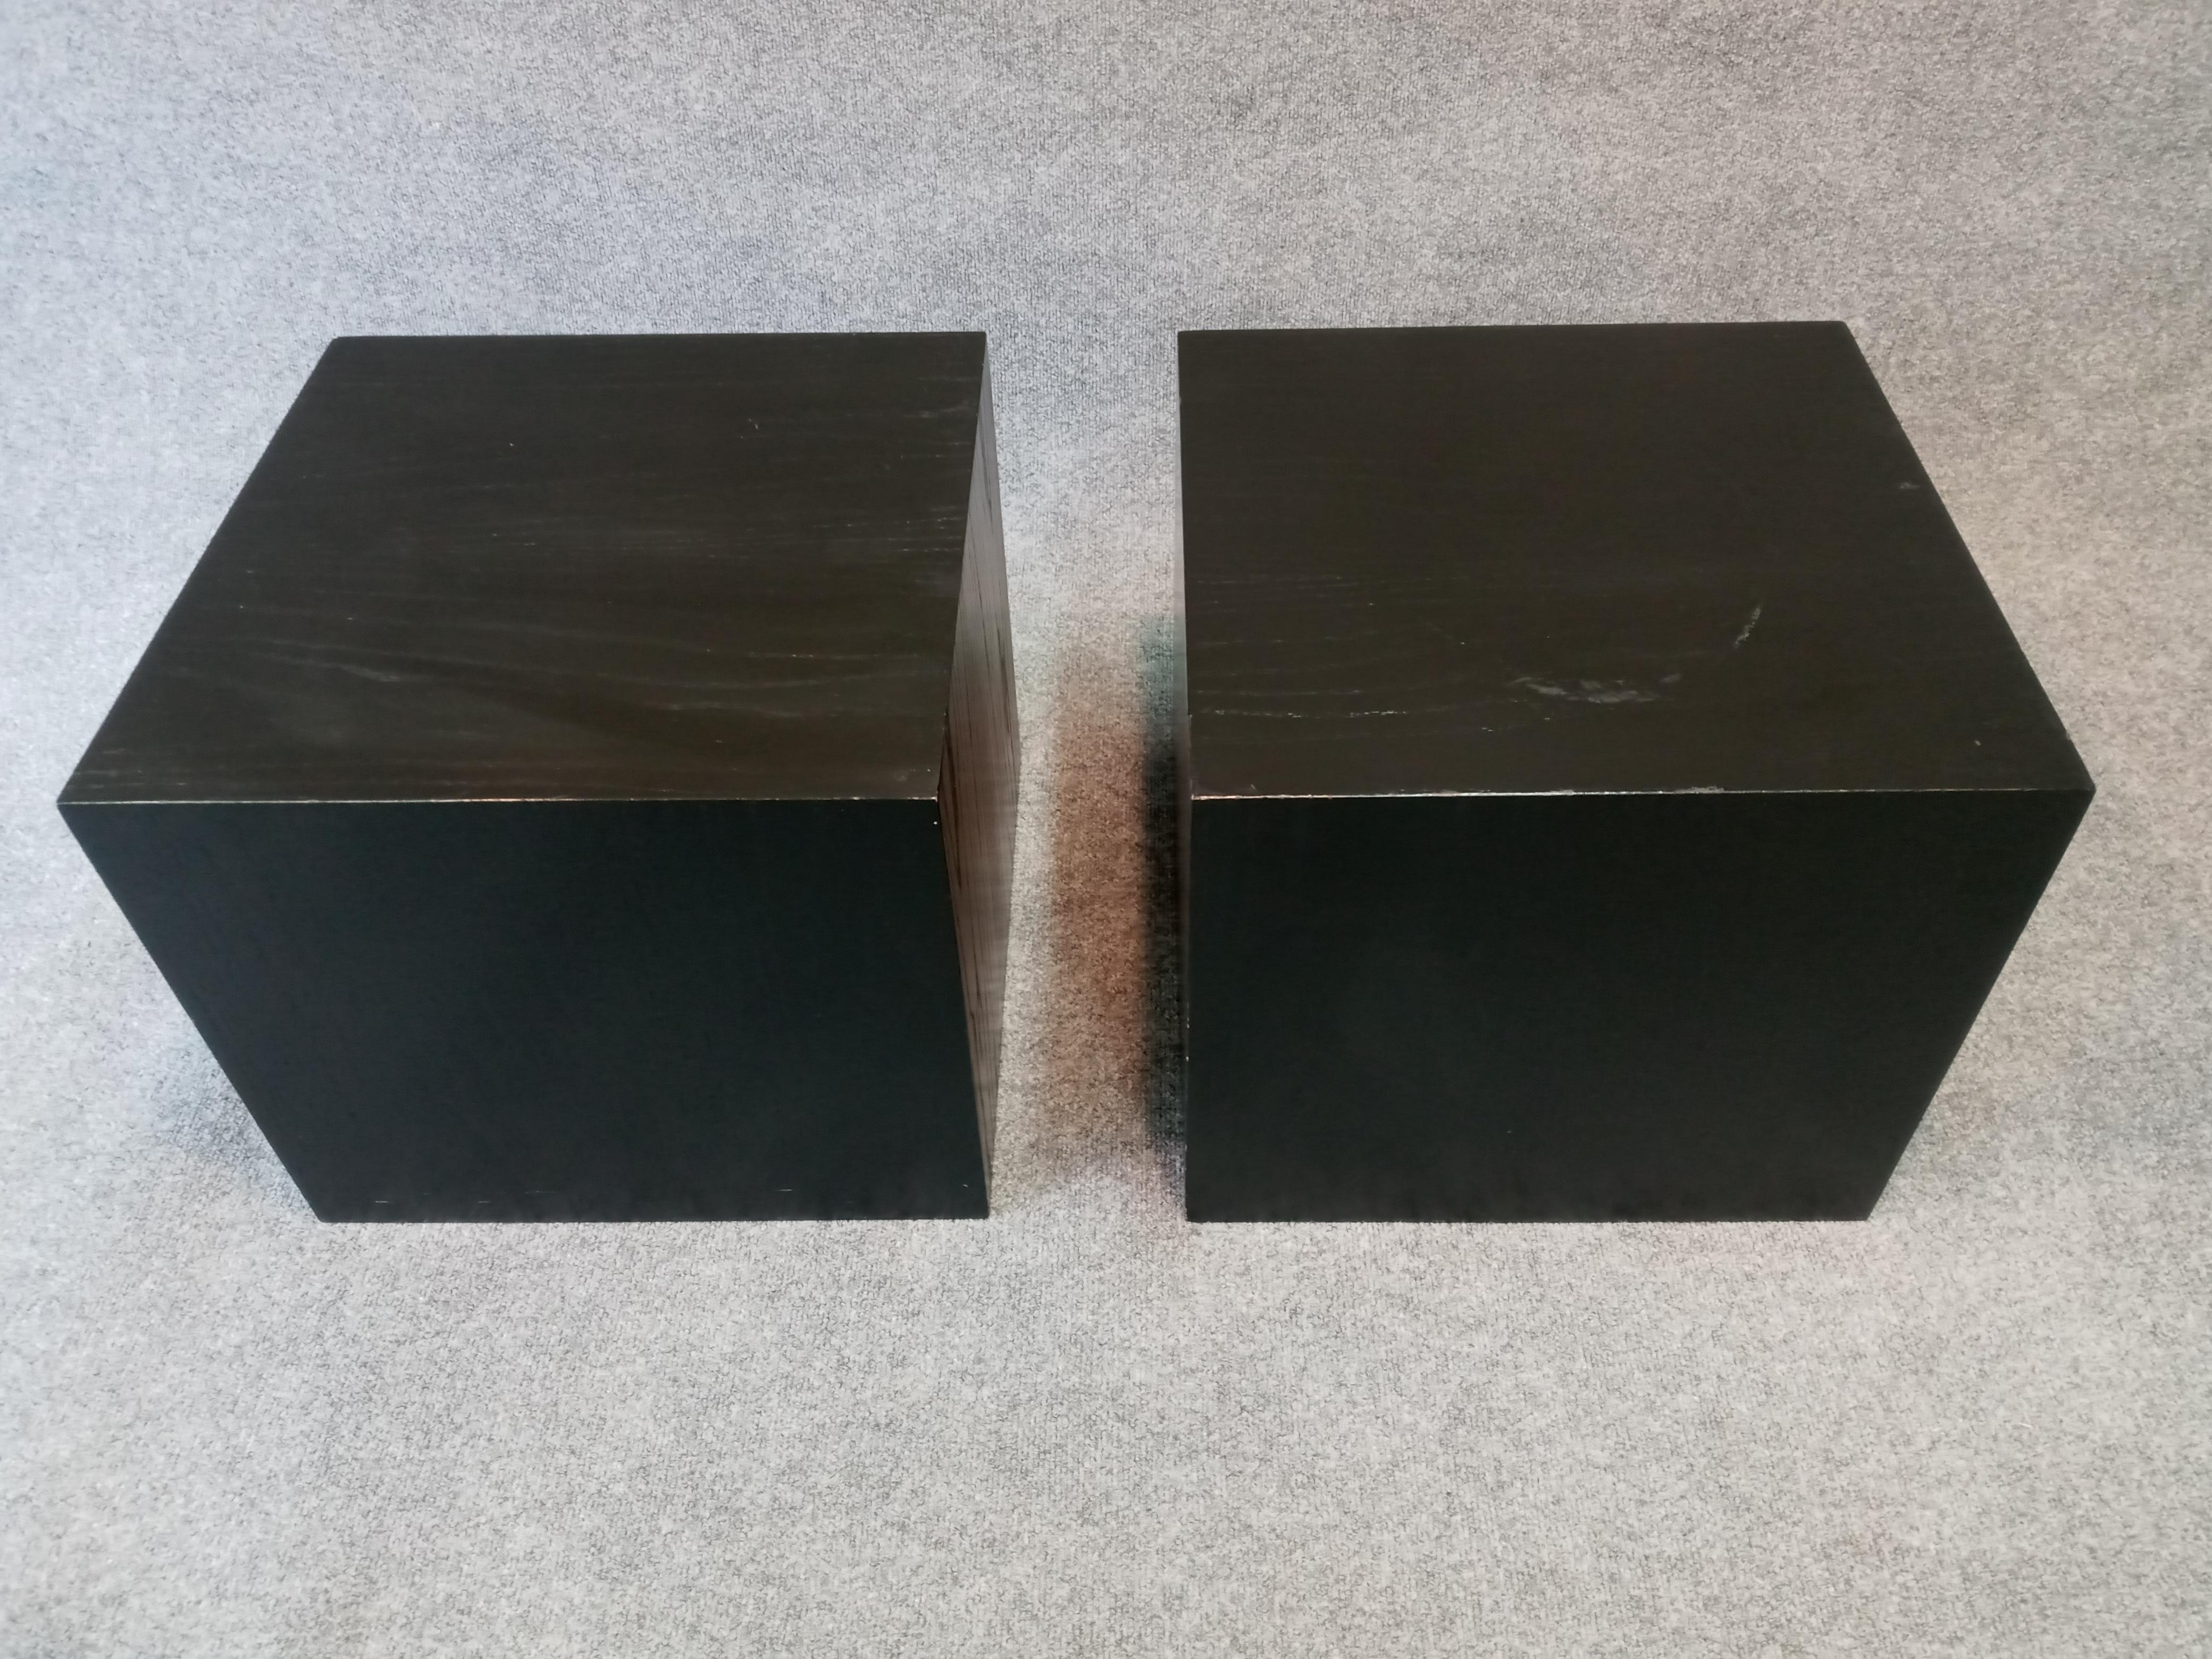 Designed by Edward Axel Roffman, American, circa 1970s, these practical and fashionable side tables can be used in any number of ways. Retaining original enamel, showing minor scuffs and scratches. Note: despite their diminutive size, these tables